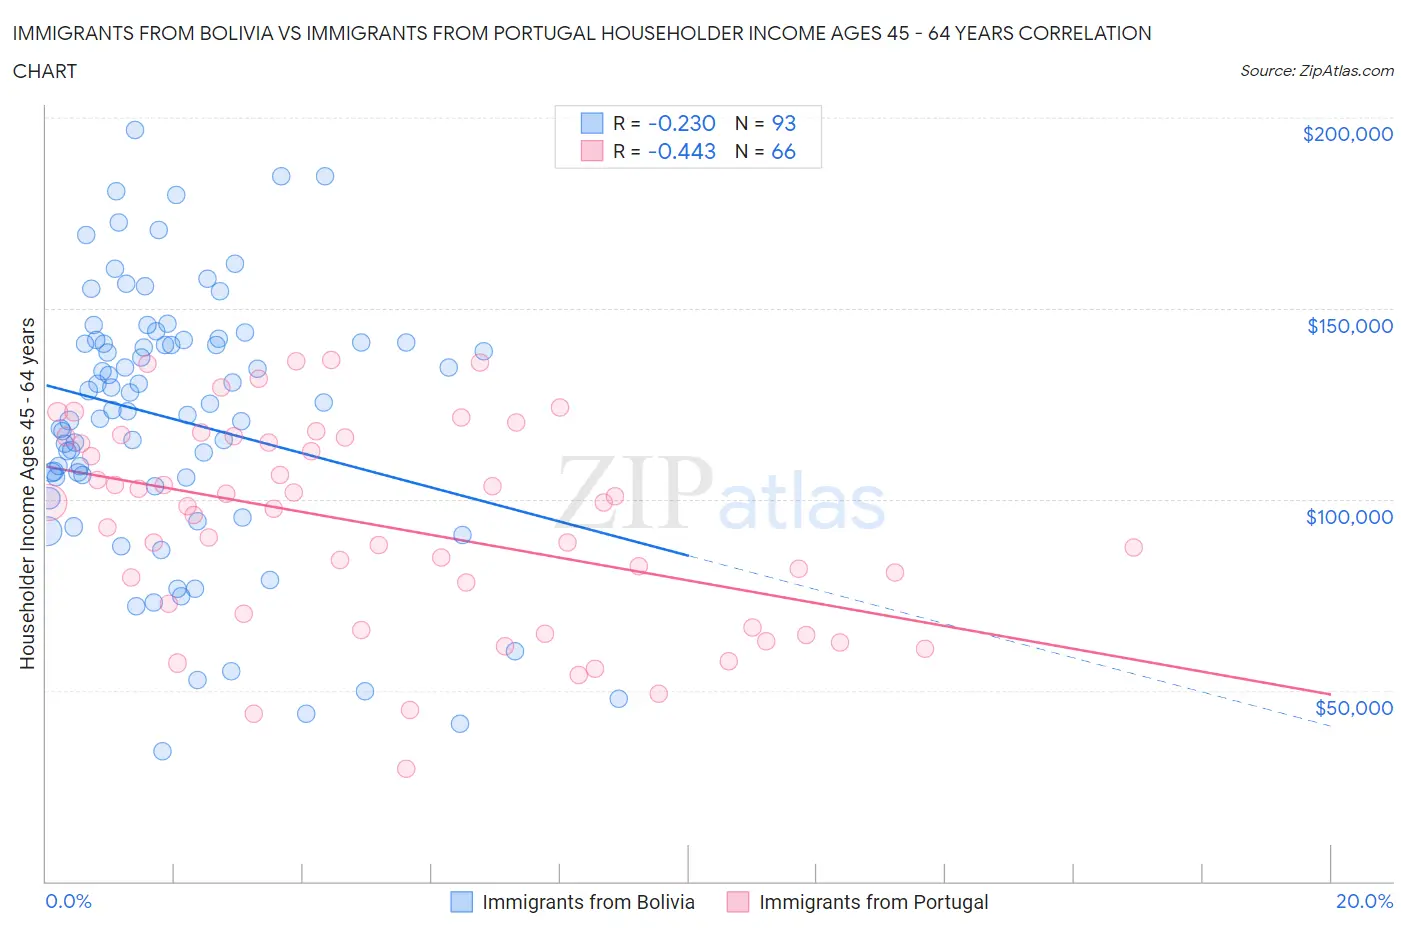 Immigrants from Bolivia vs Immigrants from Portugal Householder Income Ages 45 - 64 years